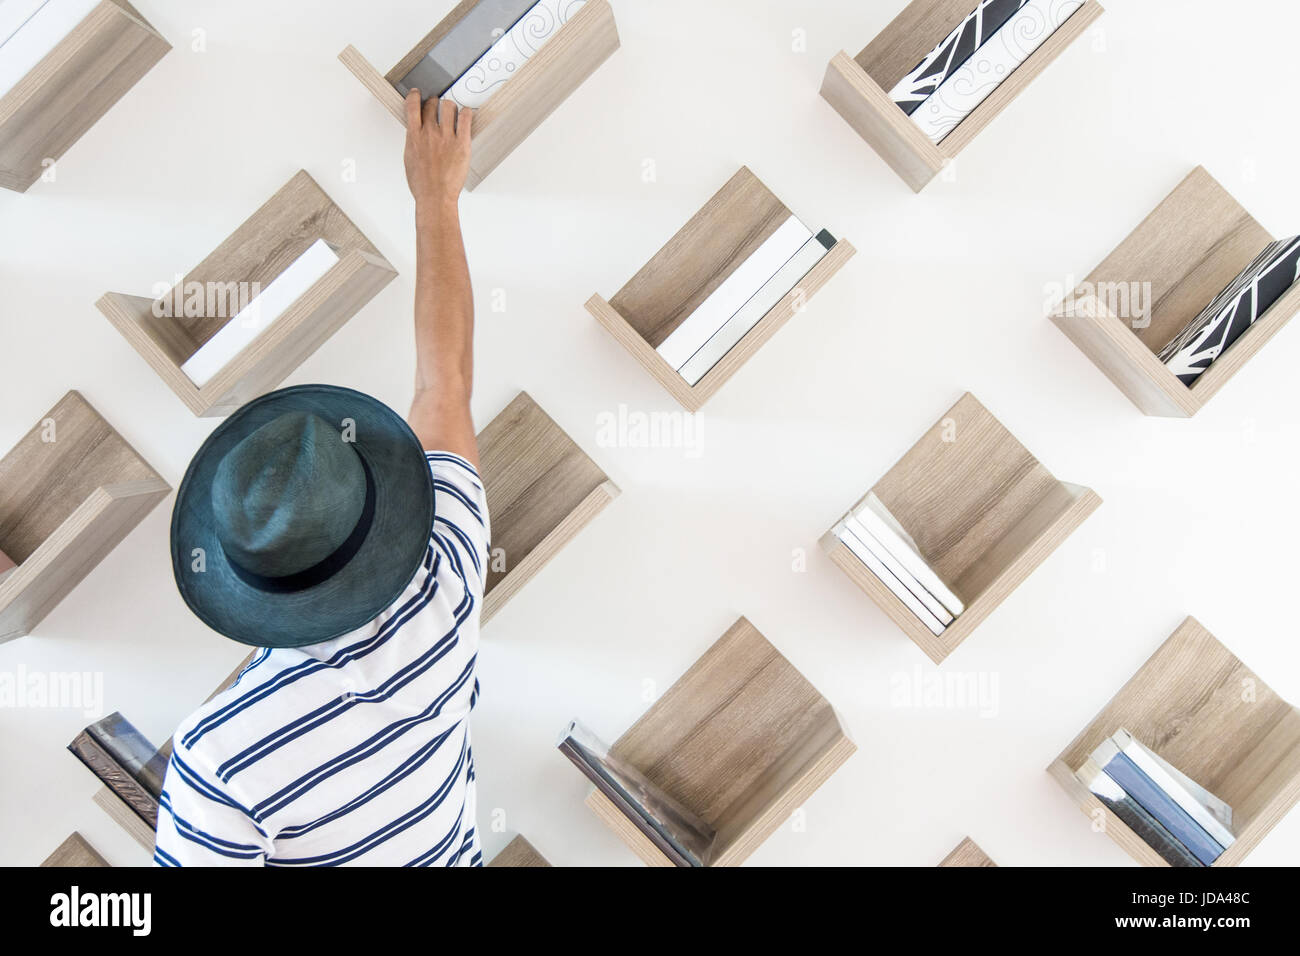 A man is searching for the book he wants in a beautifully decorated library with a bookshelf and rattan chair. Stock Photo